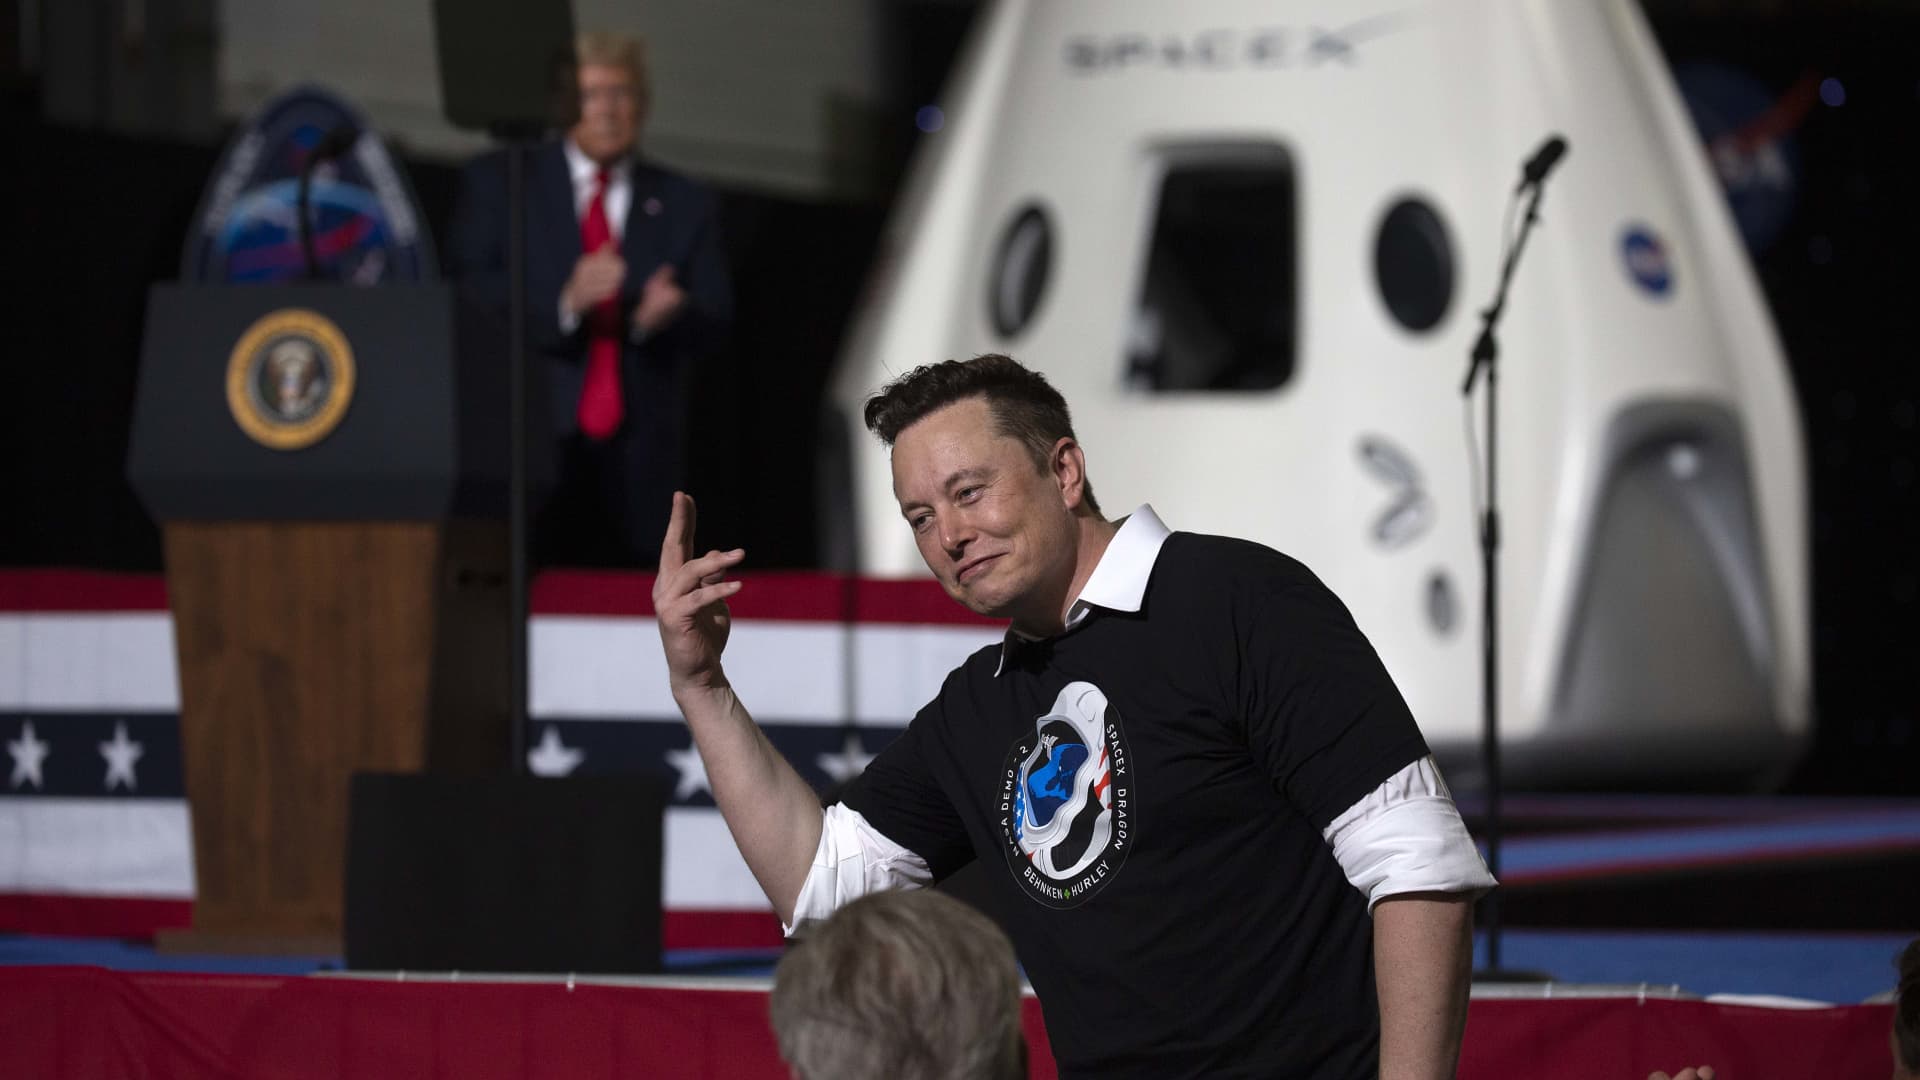 Elon Musk after the successful launch of the SpaceX Falcon 9 rocket with the manned Crew Dragon spacecraft at the Kennedy Space Center on May 30, 2020 in Cape Canaveral, Florida.